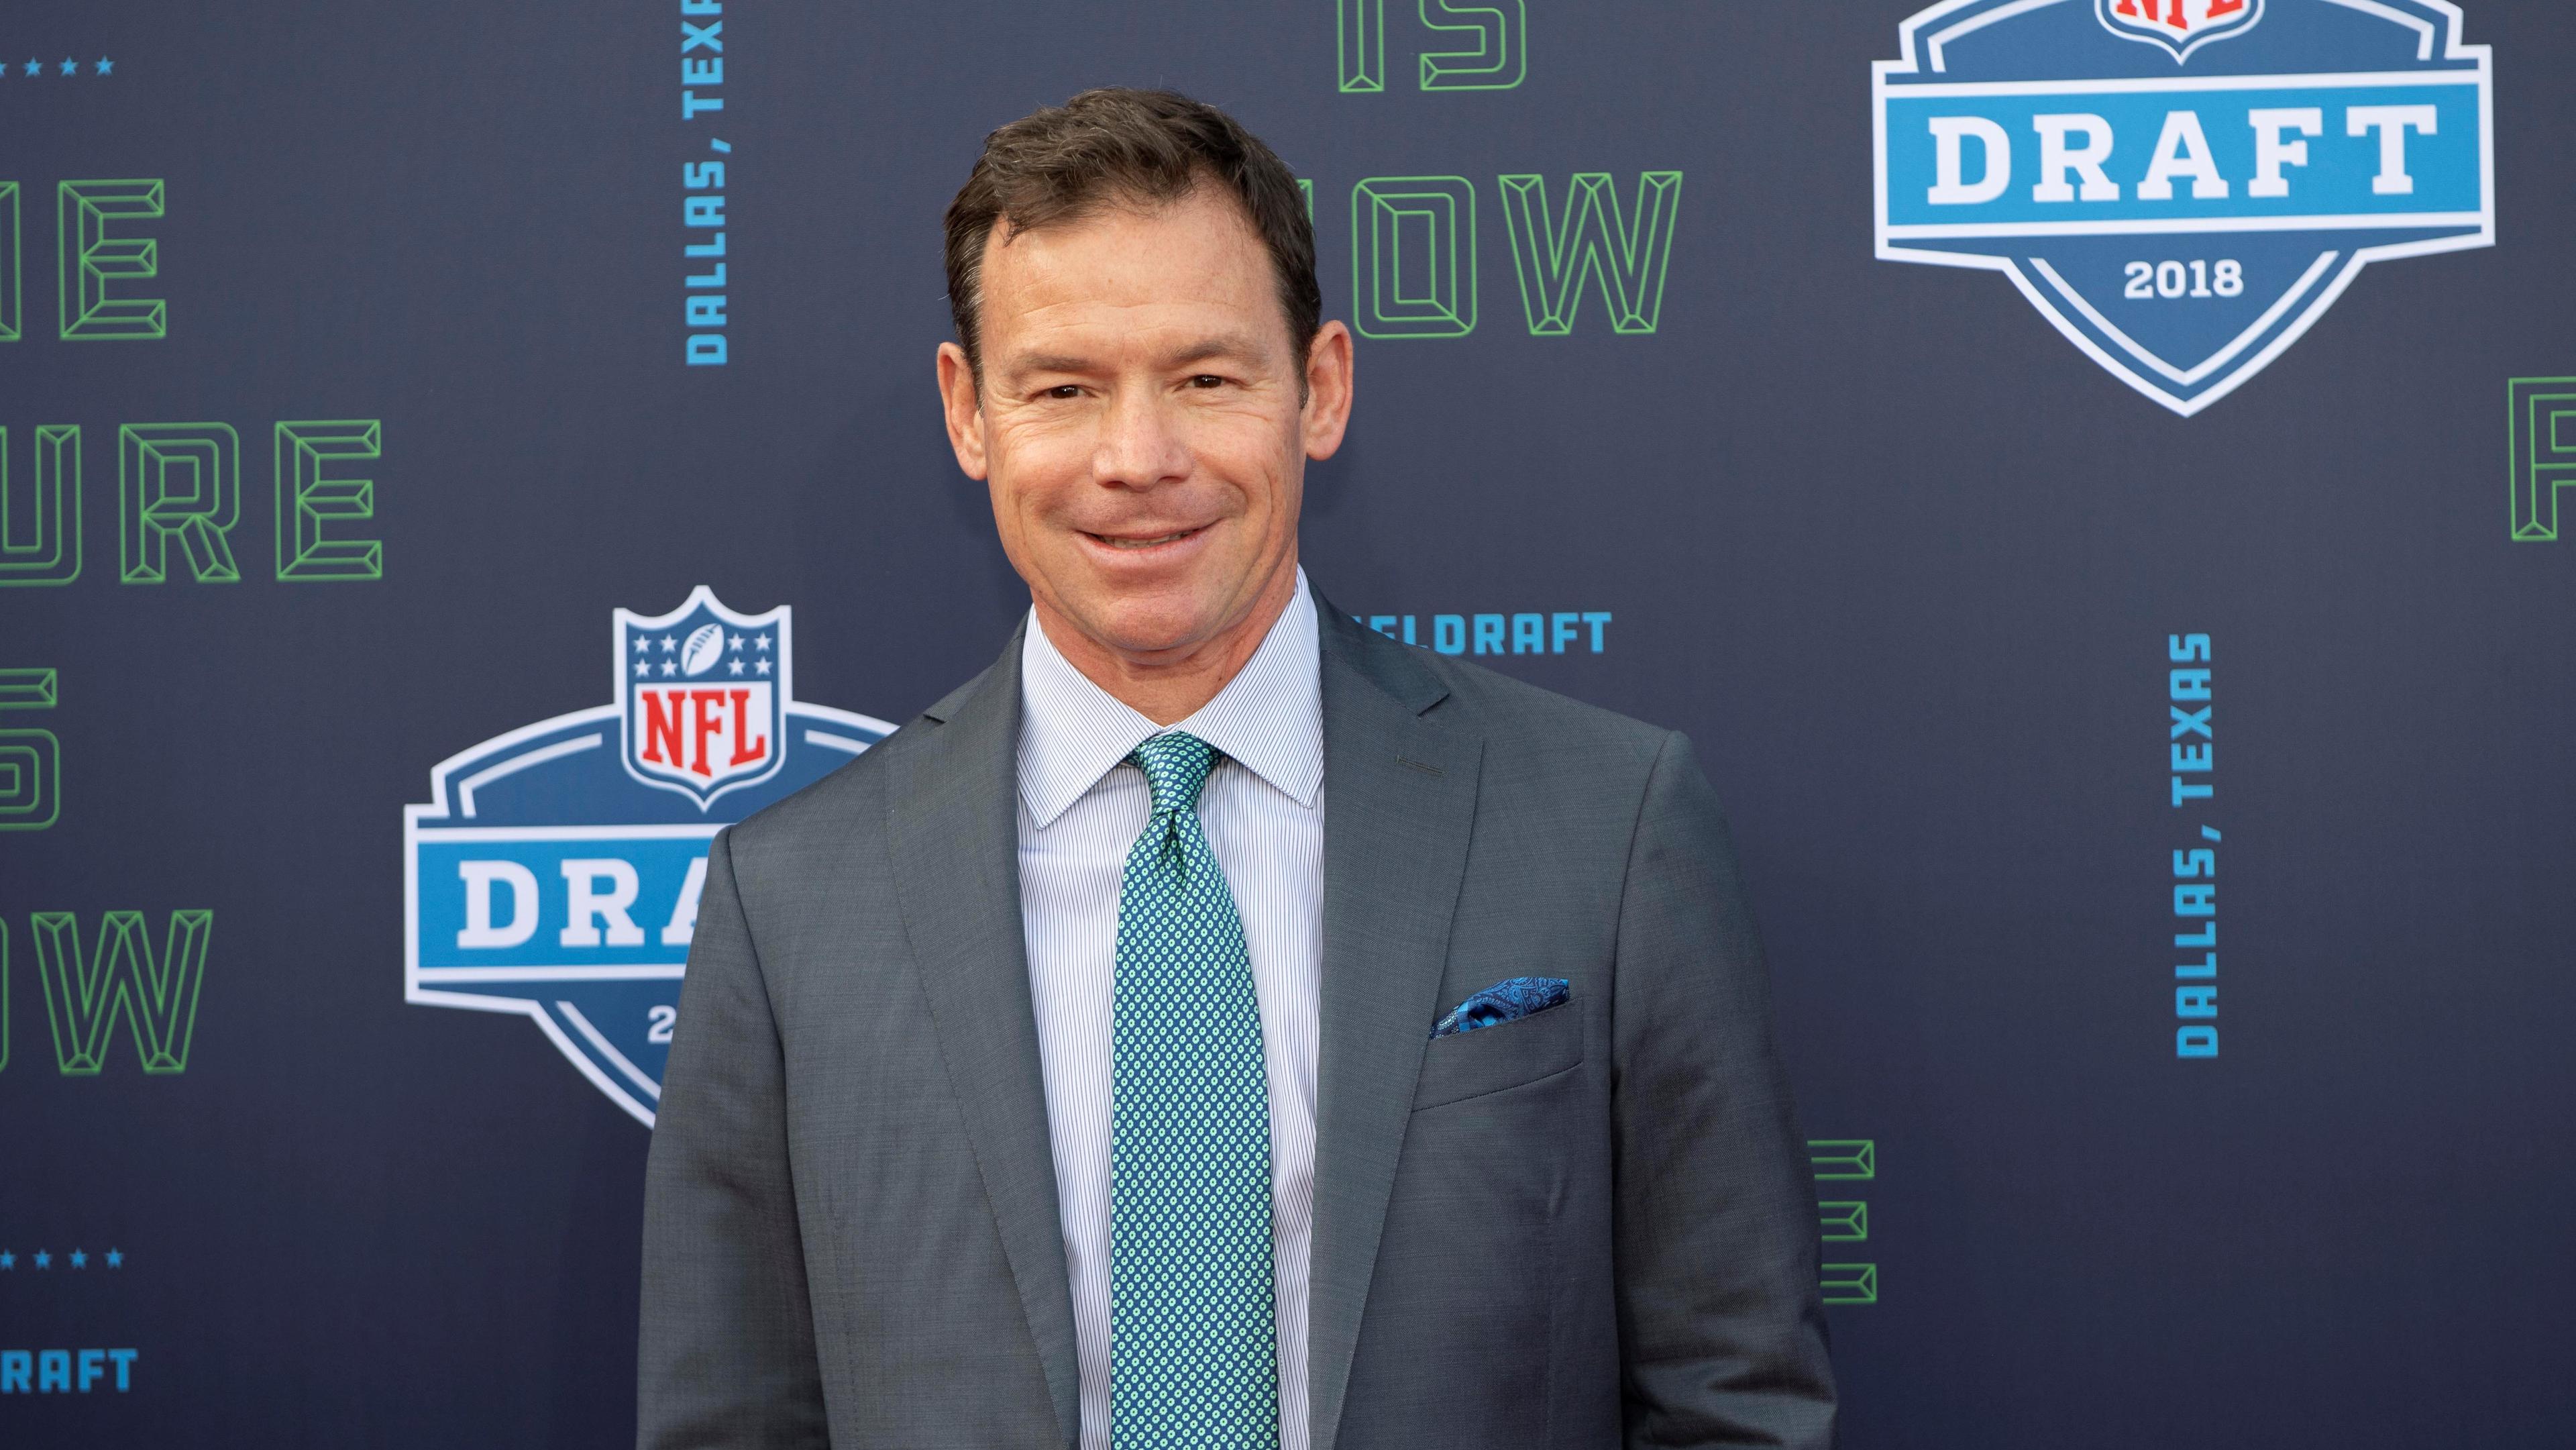 Former UCLA head coach Jim Mora arrives on the red carpet before the 2018 NFL Draft at AT&T Stadium. / Jerome Miron-USA TODAY Sports